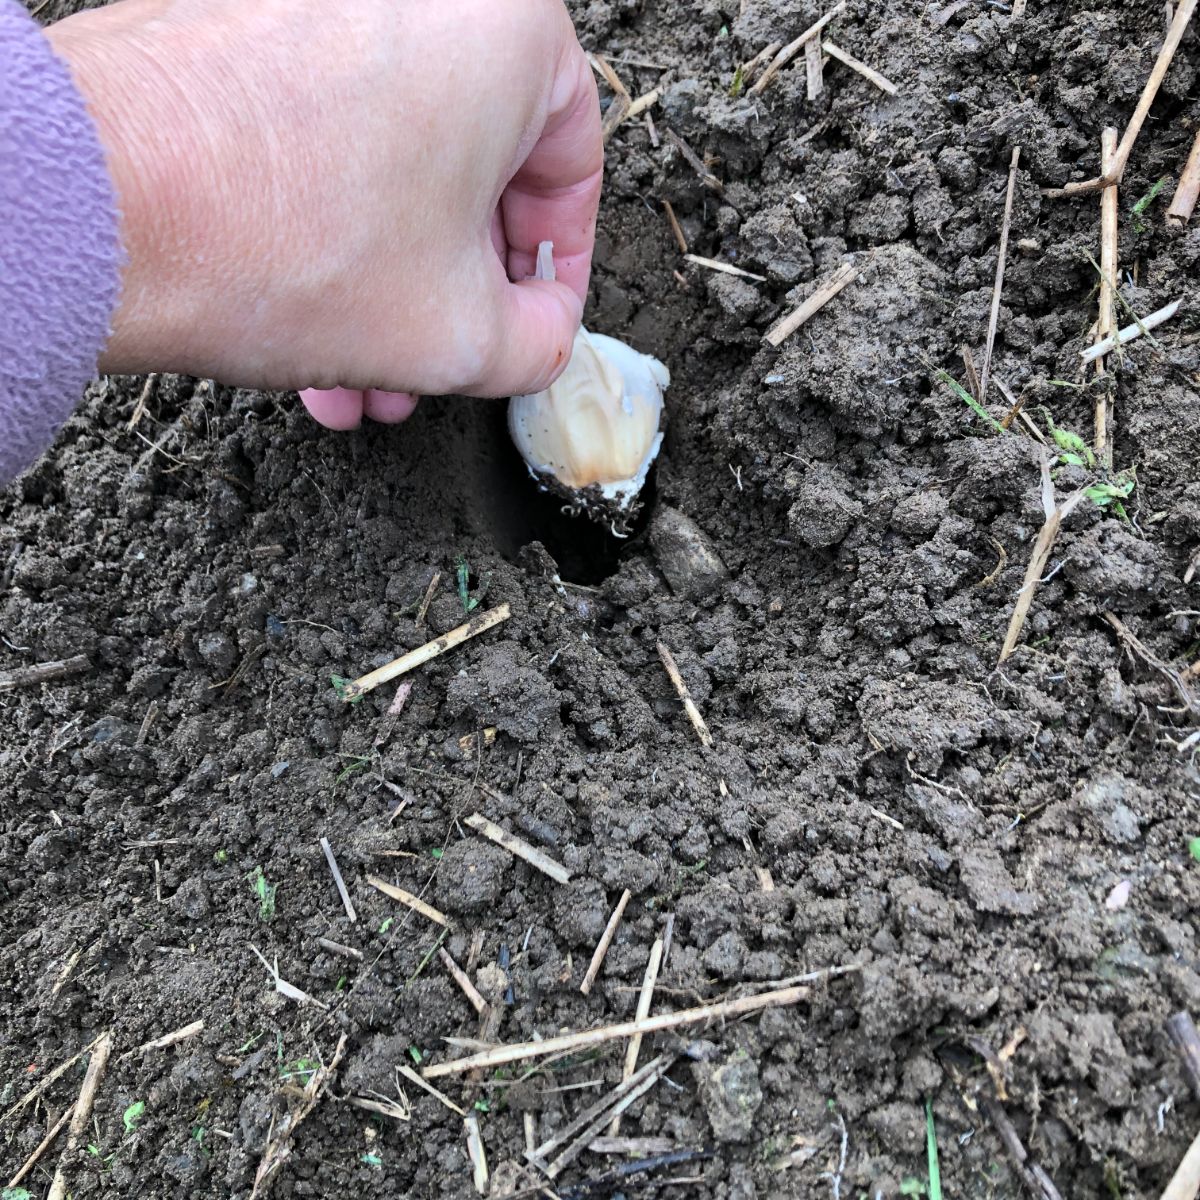 Planting a clove of garlic in the ground